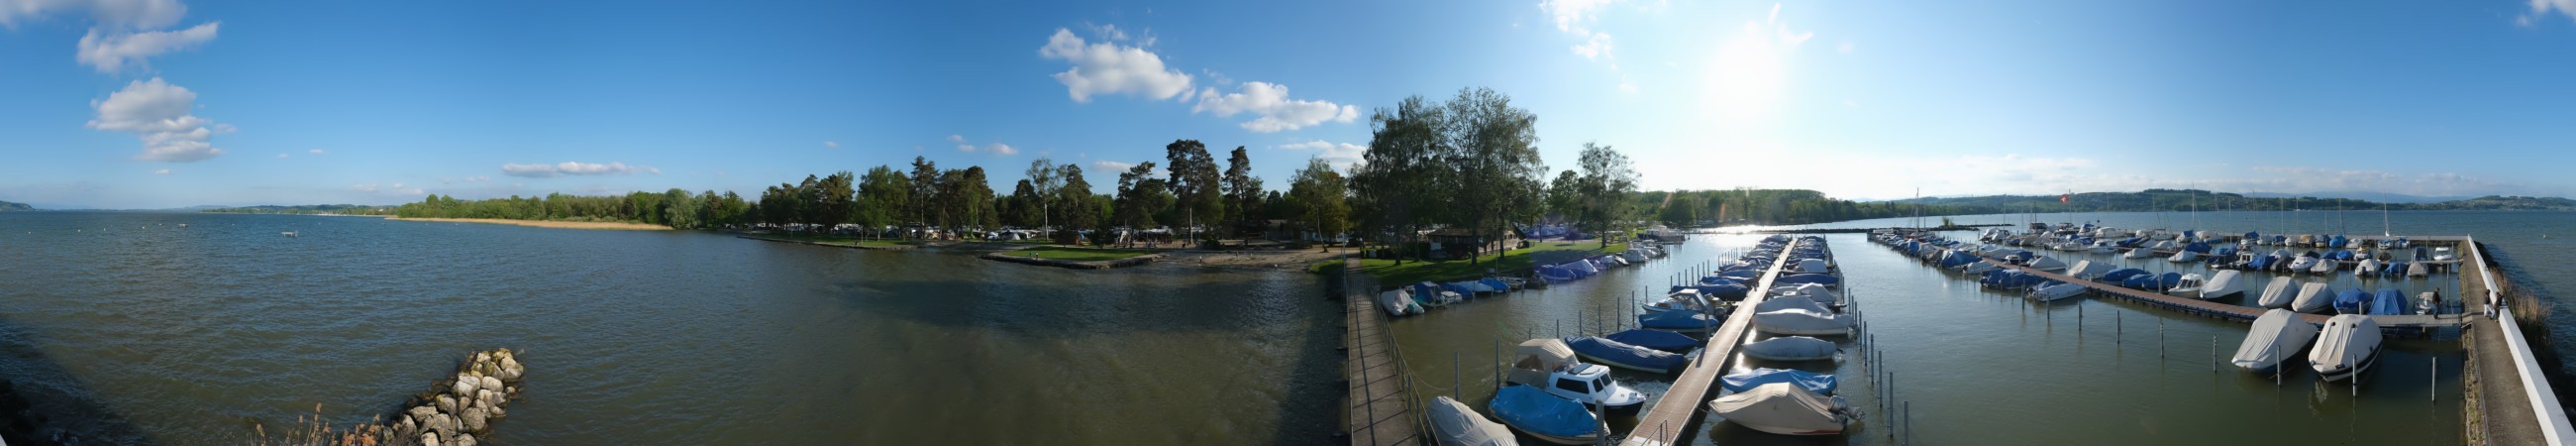 Avenches (Camping plage)